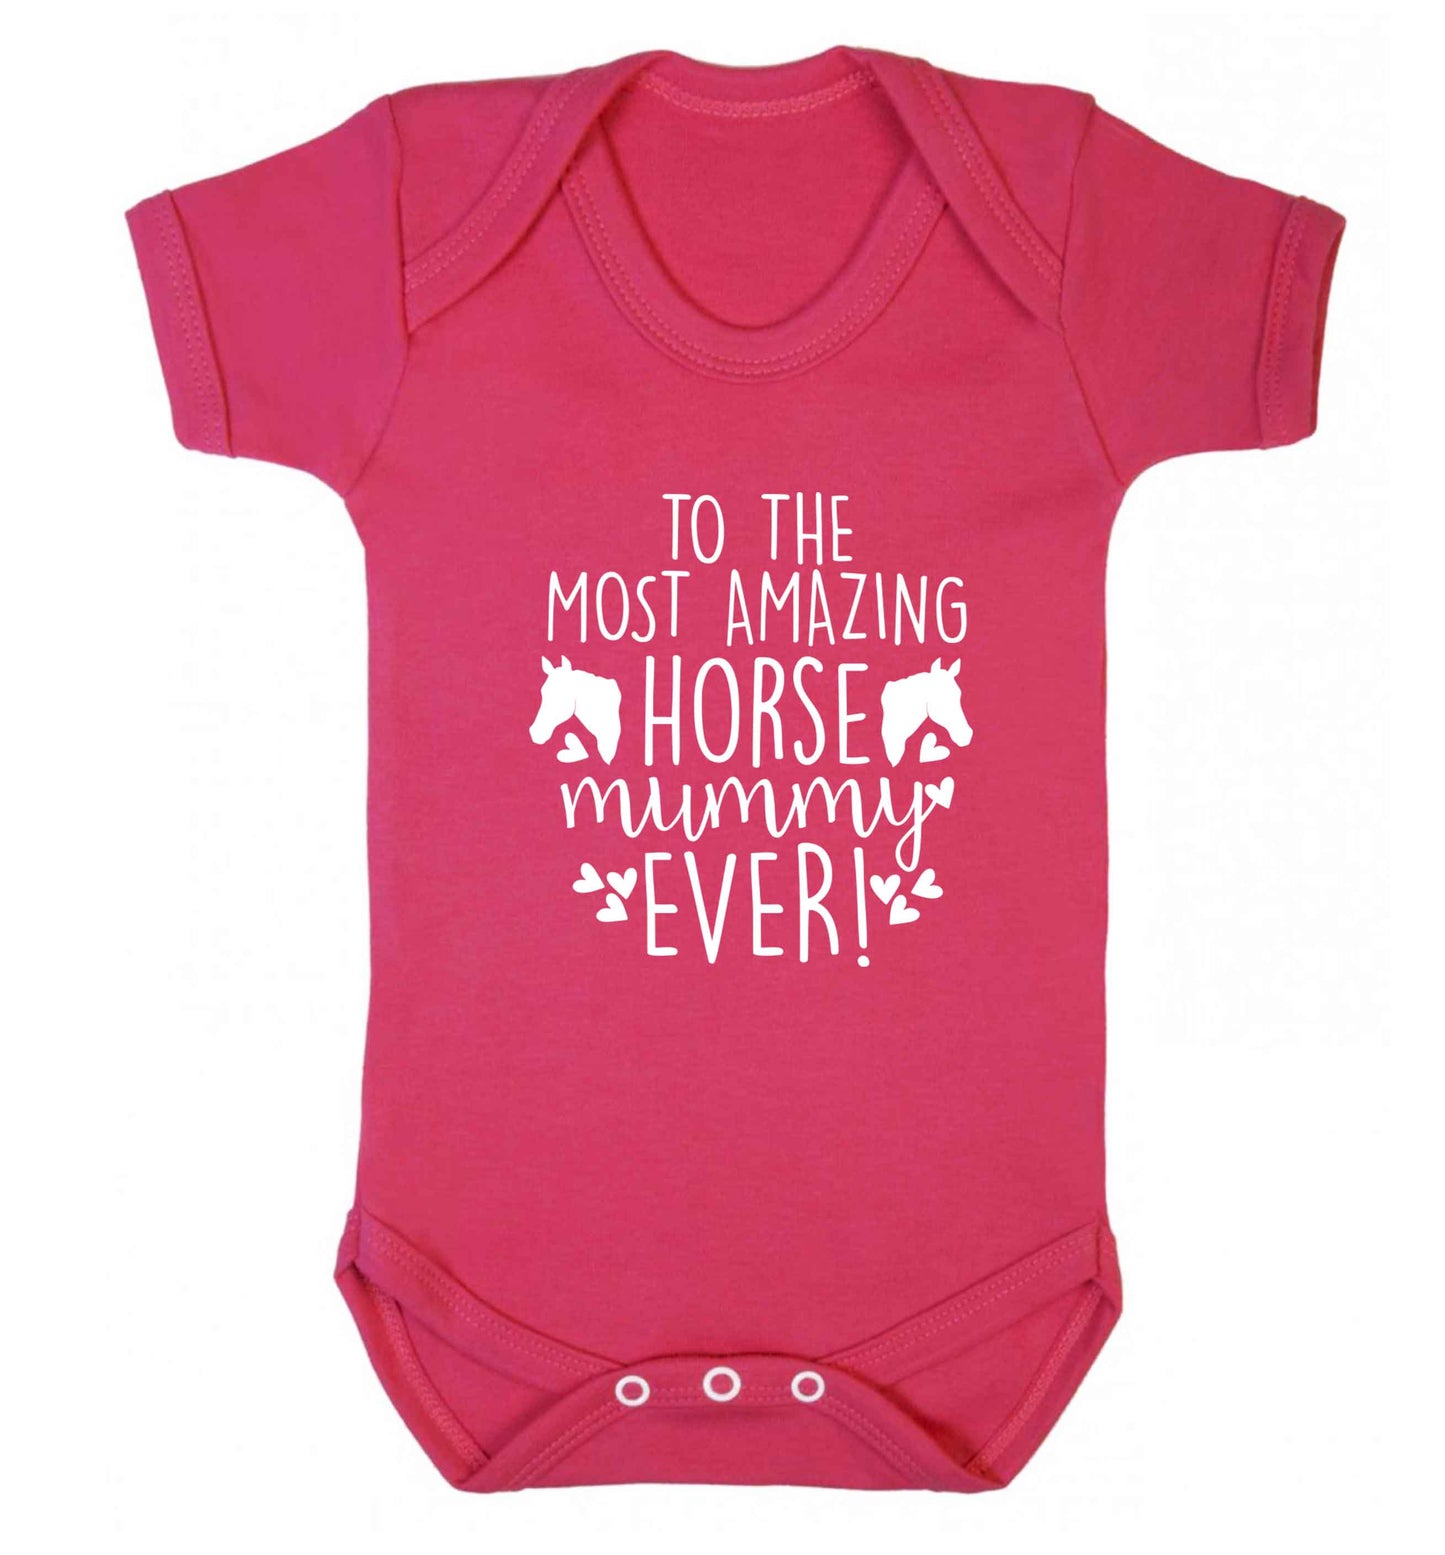 To the most amazing horse mummy ever! baby vest dark pink 18-24 months